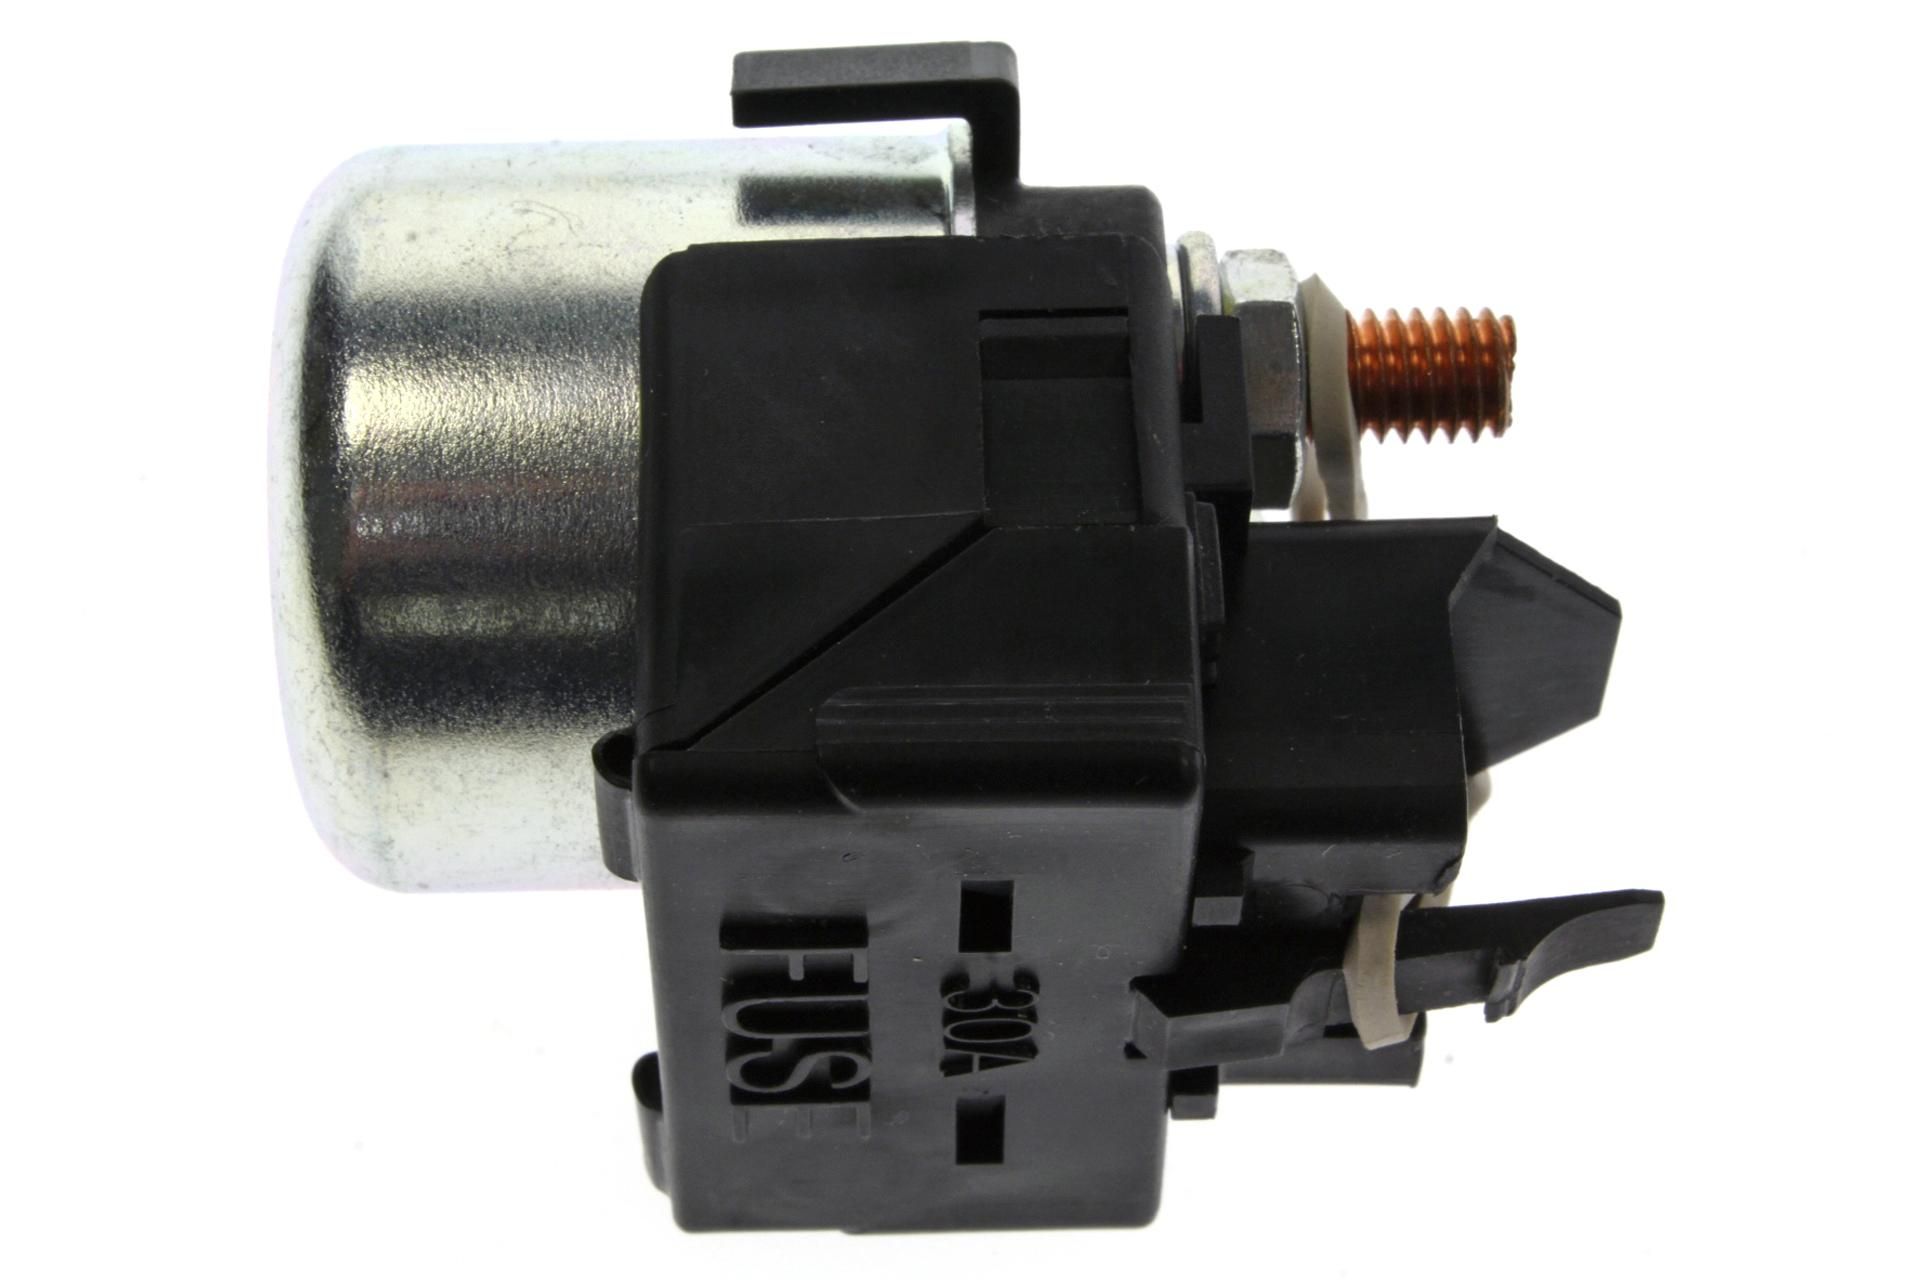  PROCOMPANY Starter Relay Solenoid Replaces Replaces for Honda  OEM numbers 35850-ME8-007 35851-MJ0-000 : Automotive